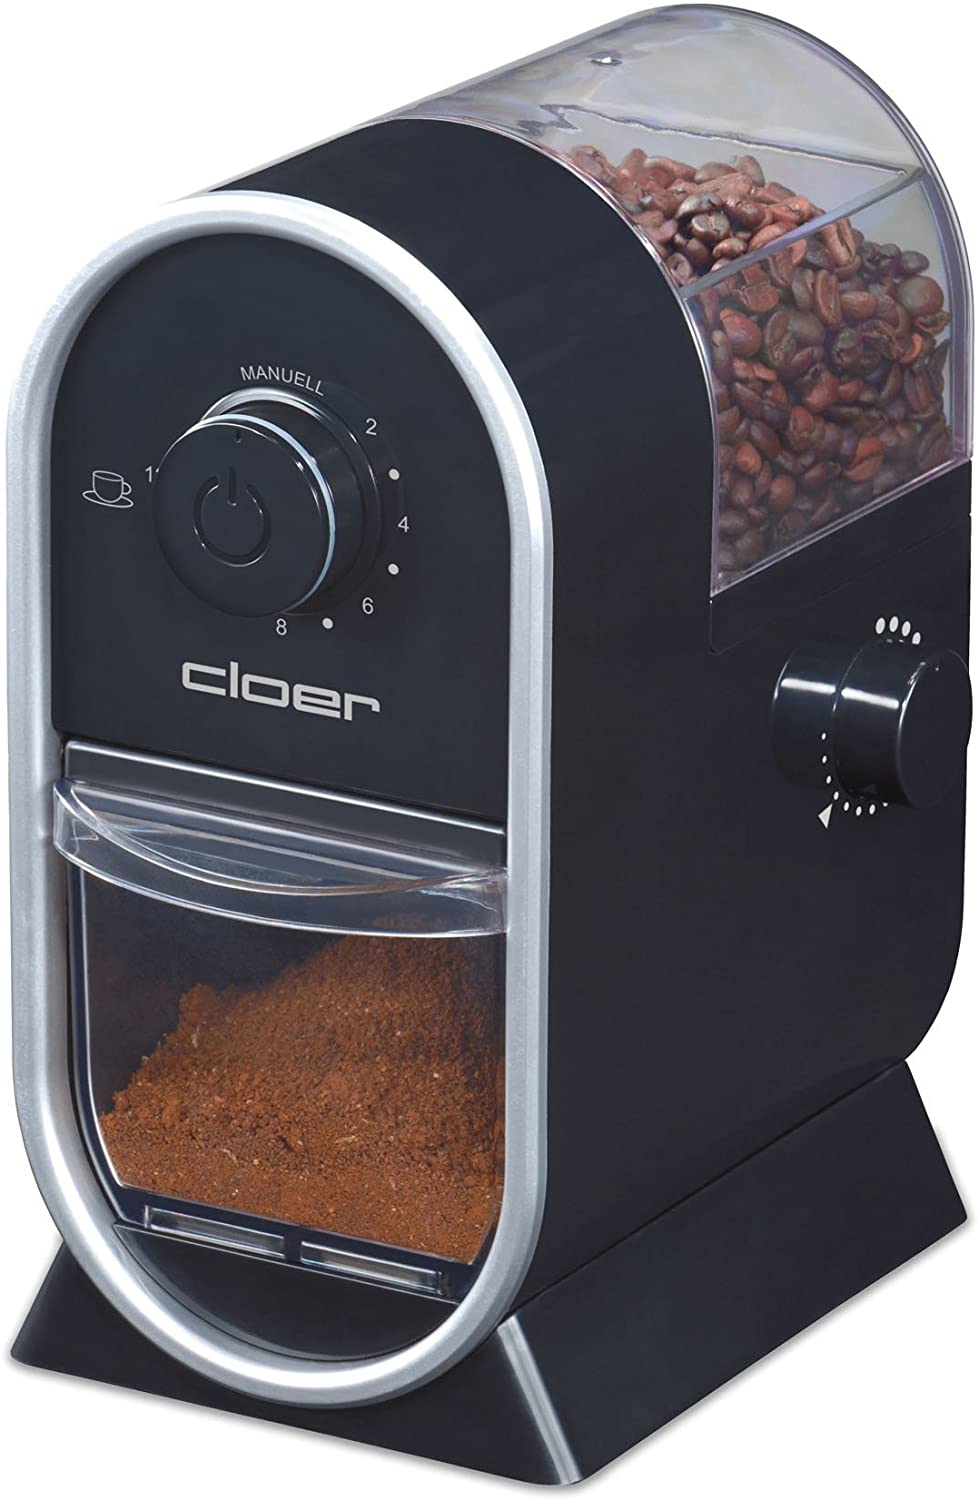 Cloer 7560 Electric Coffee Grinder with Disc Grinder / 100 W / for 150 g Coffee Beans / for 2-12 Cups / Adjustable Grinding Level / Black